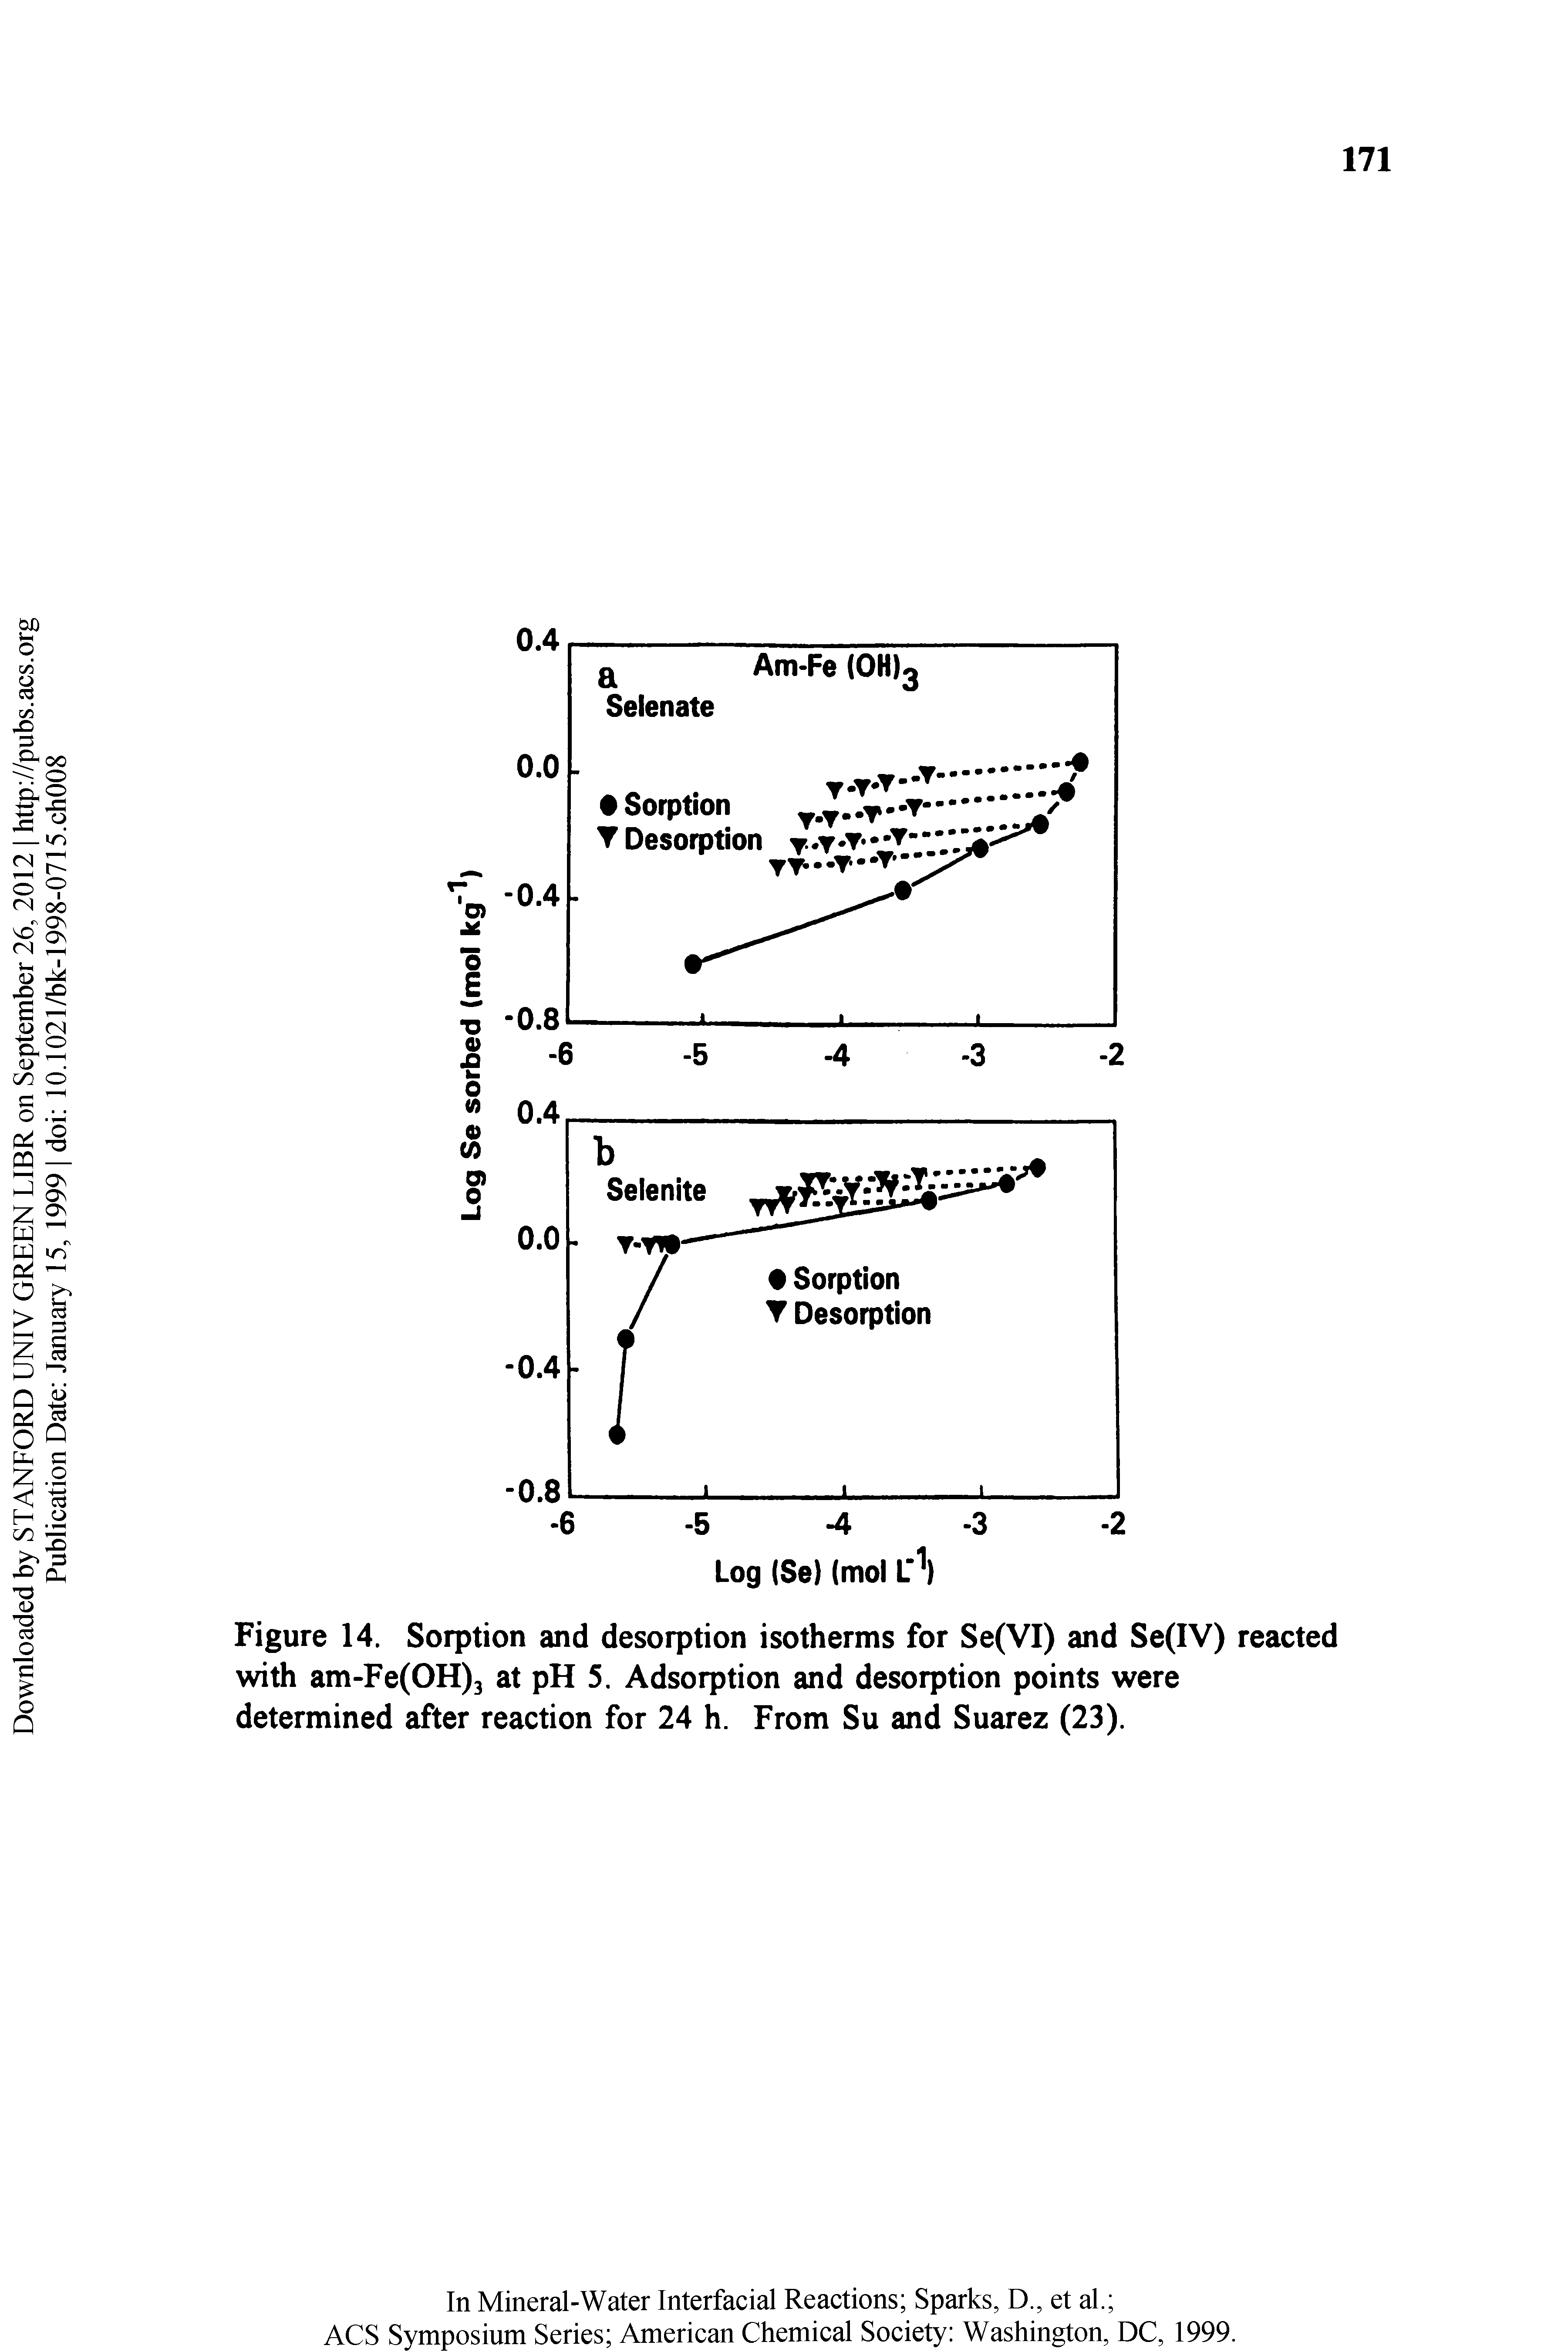 Figure 14. Sorption and desorption isotherms for Se(VI) and Se(IV) reacted vsdth am-Fe(OH)3 at pH 5. Adsorption and desorption points were determined after reaction for 24 h. From Su and Suarez (23).